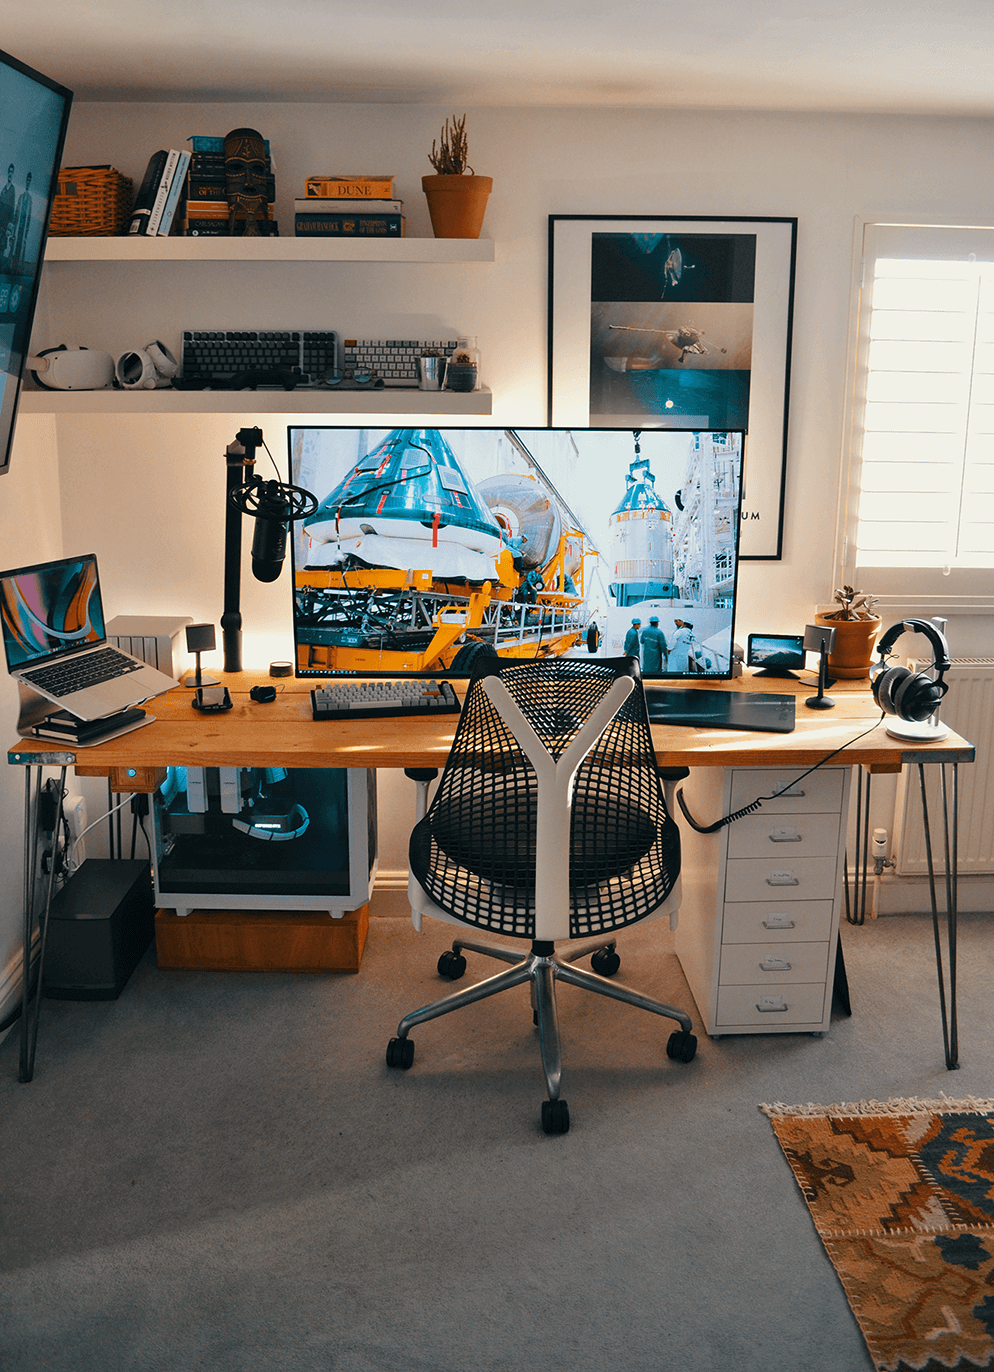 Gaming/Office Setup in a Tiny Space - Finished Projects - Blender Artists  Community